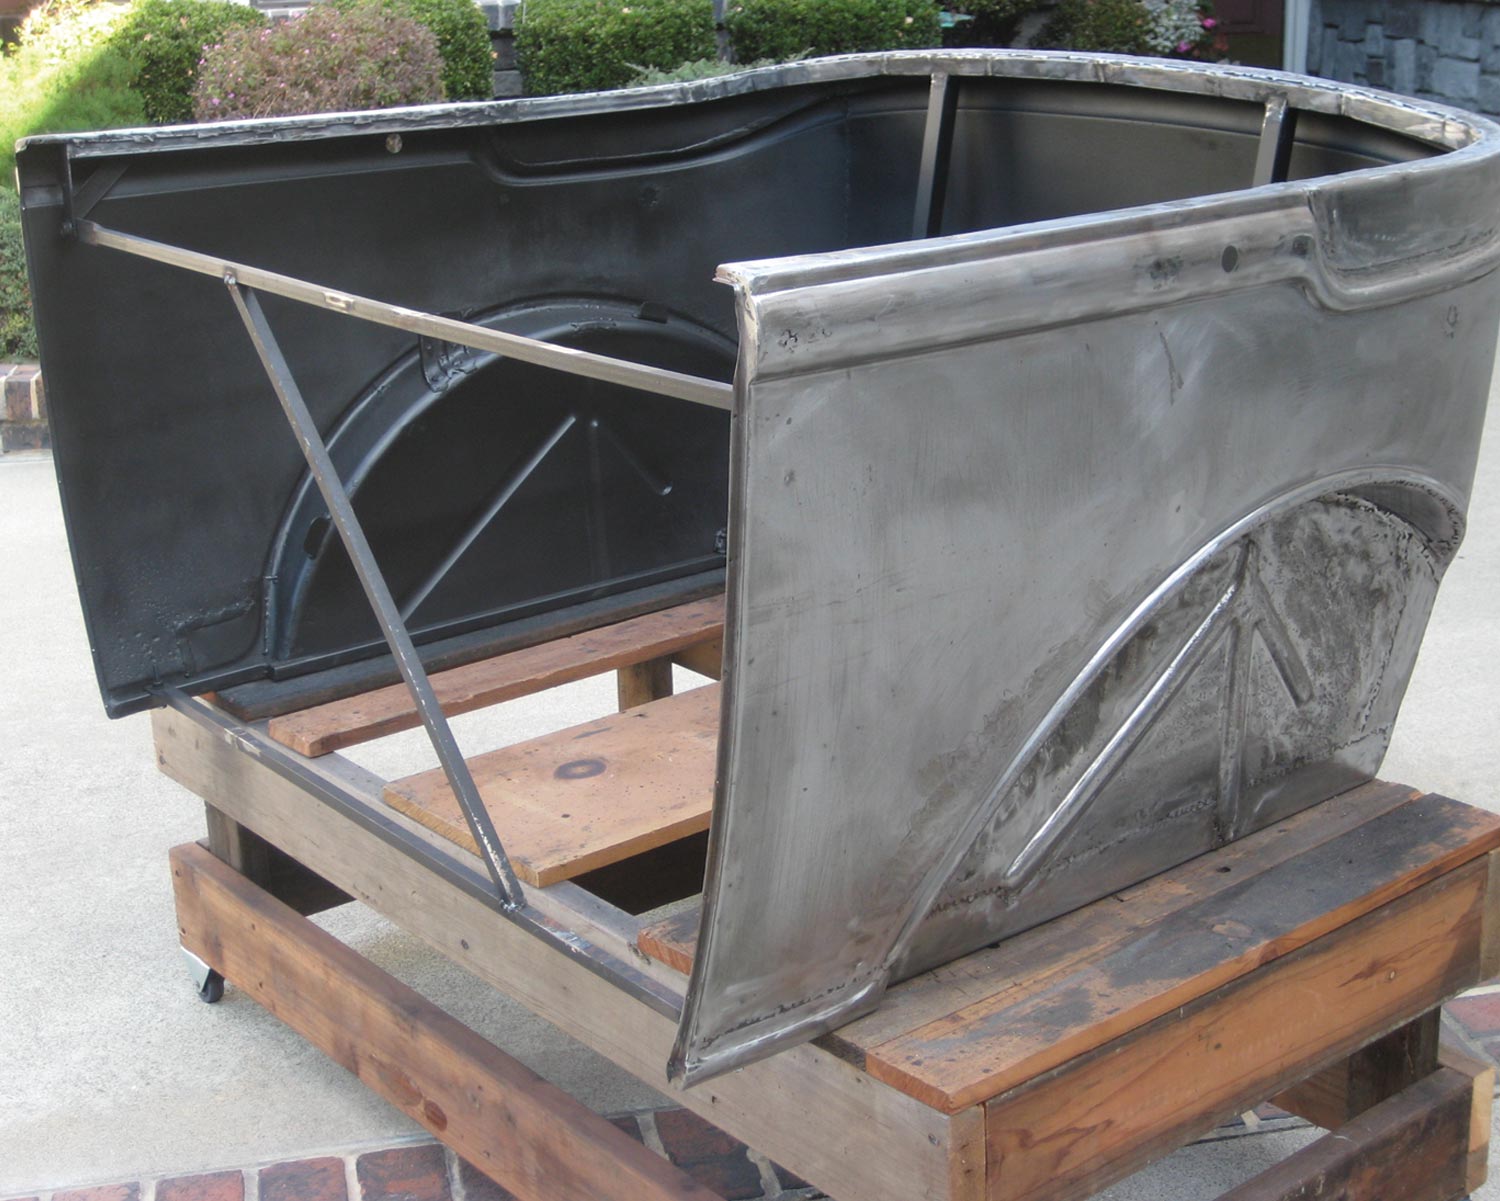 the rear portion of the body after rust repair